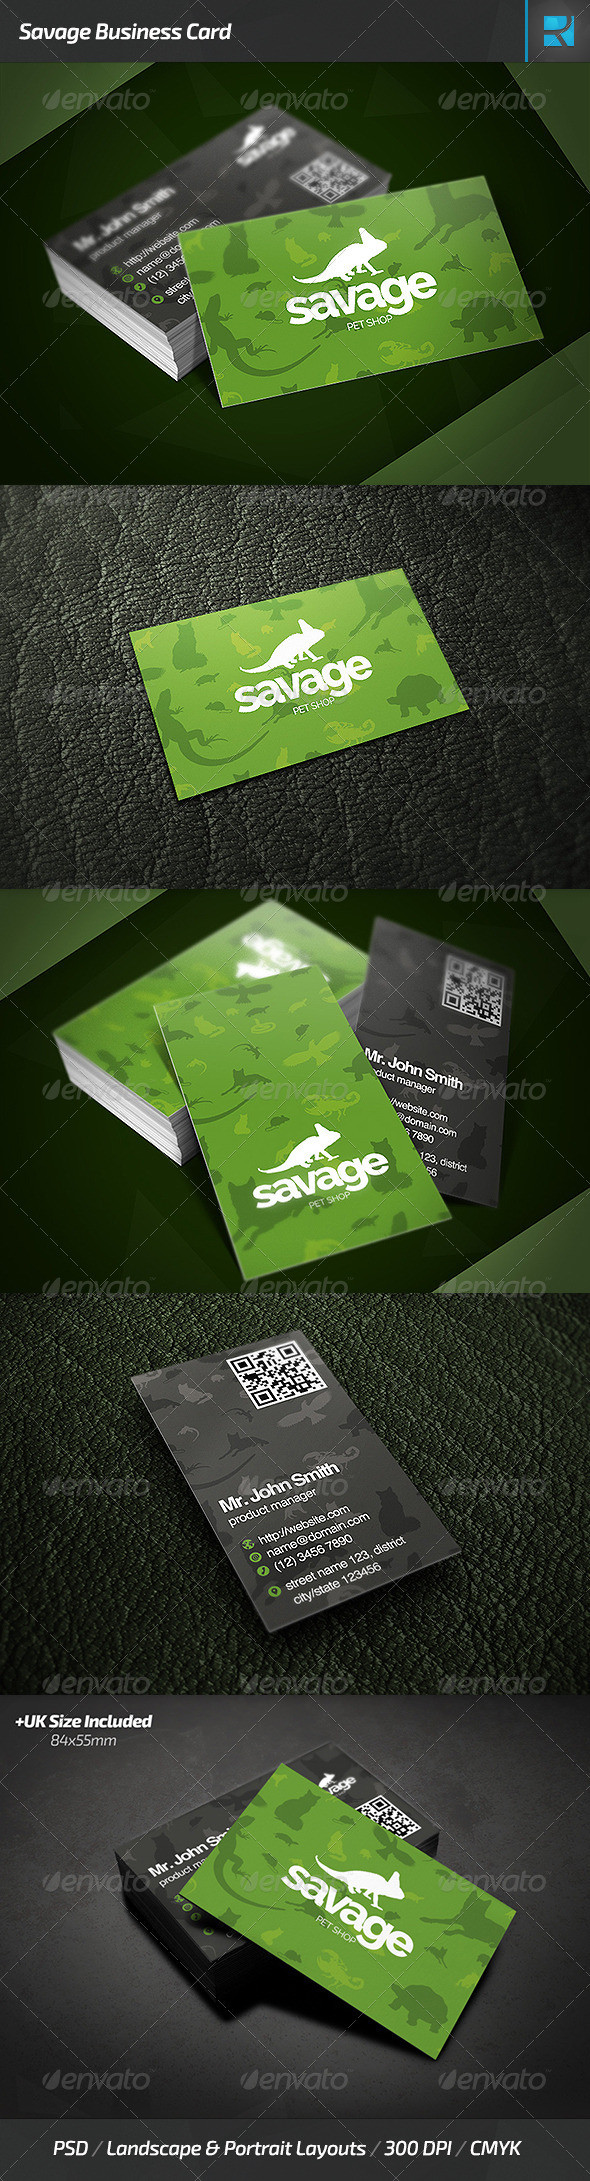 Savage business card preview